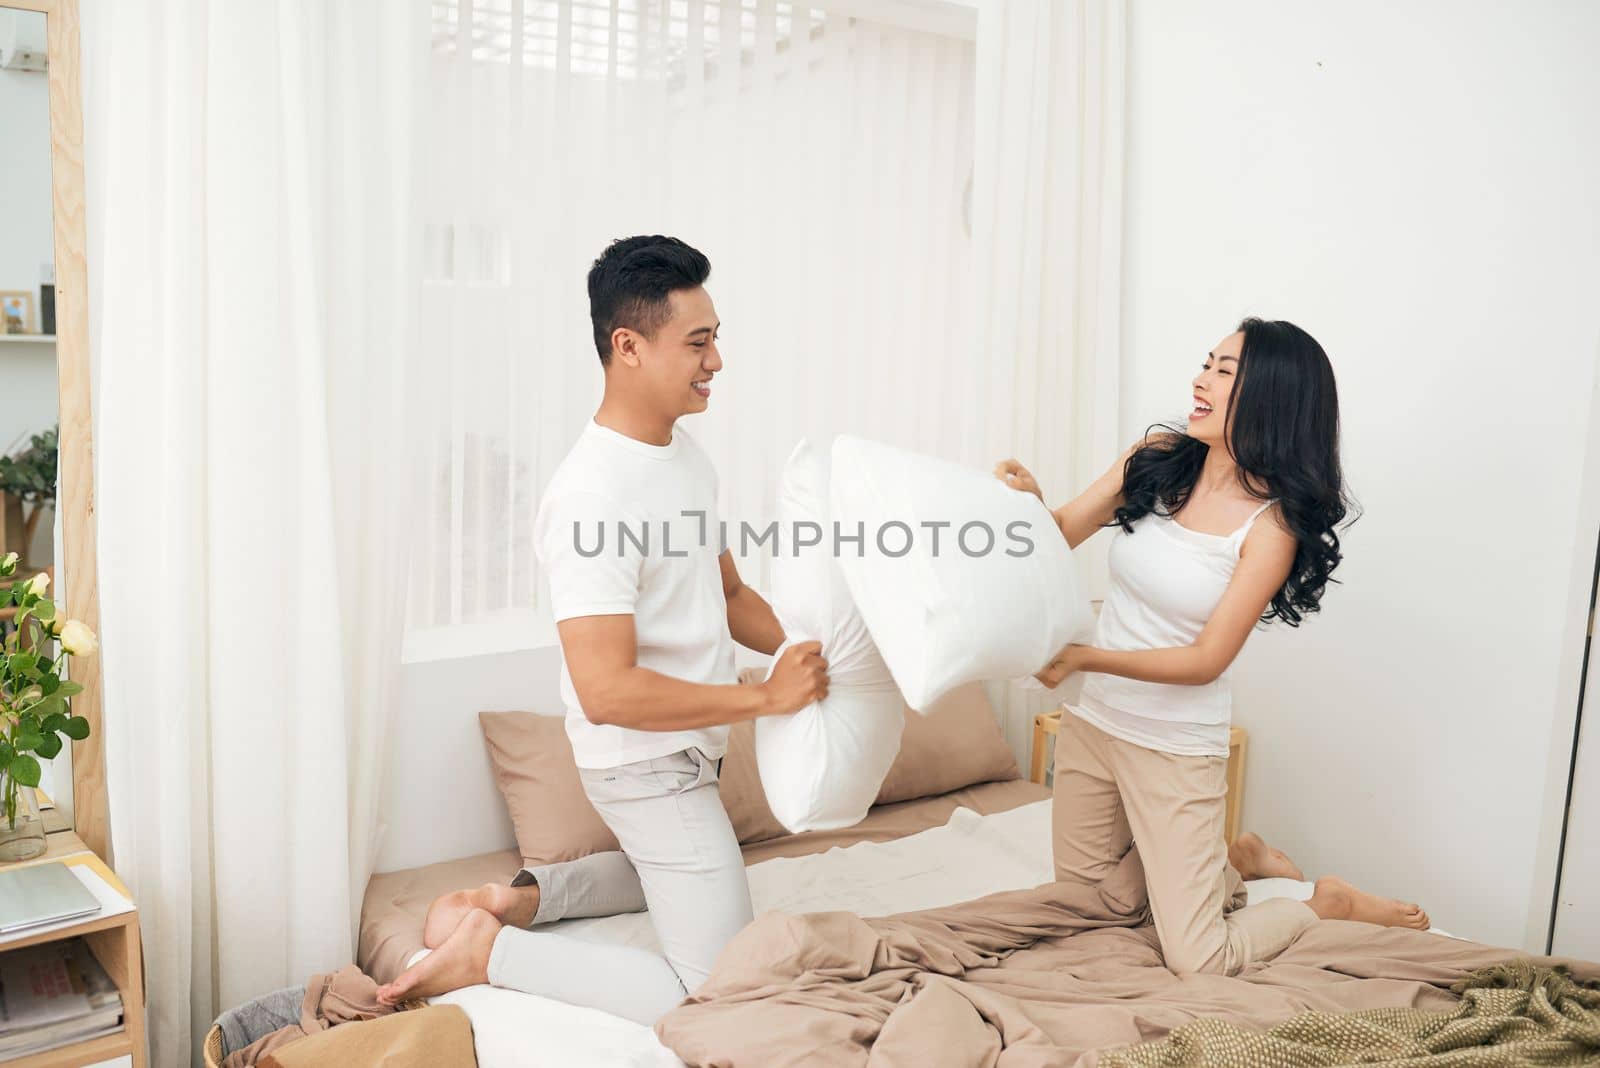 Picture showing happy couple having pillow fight